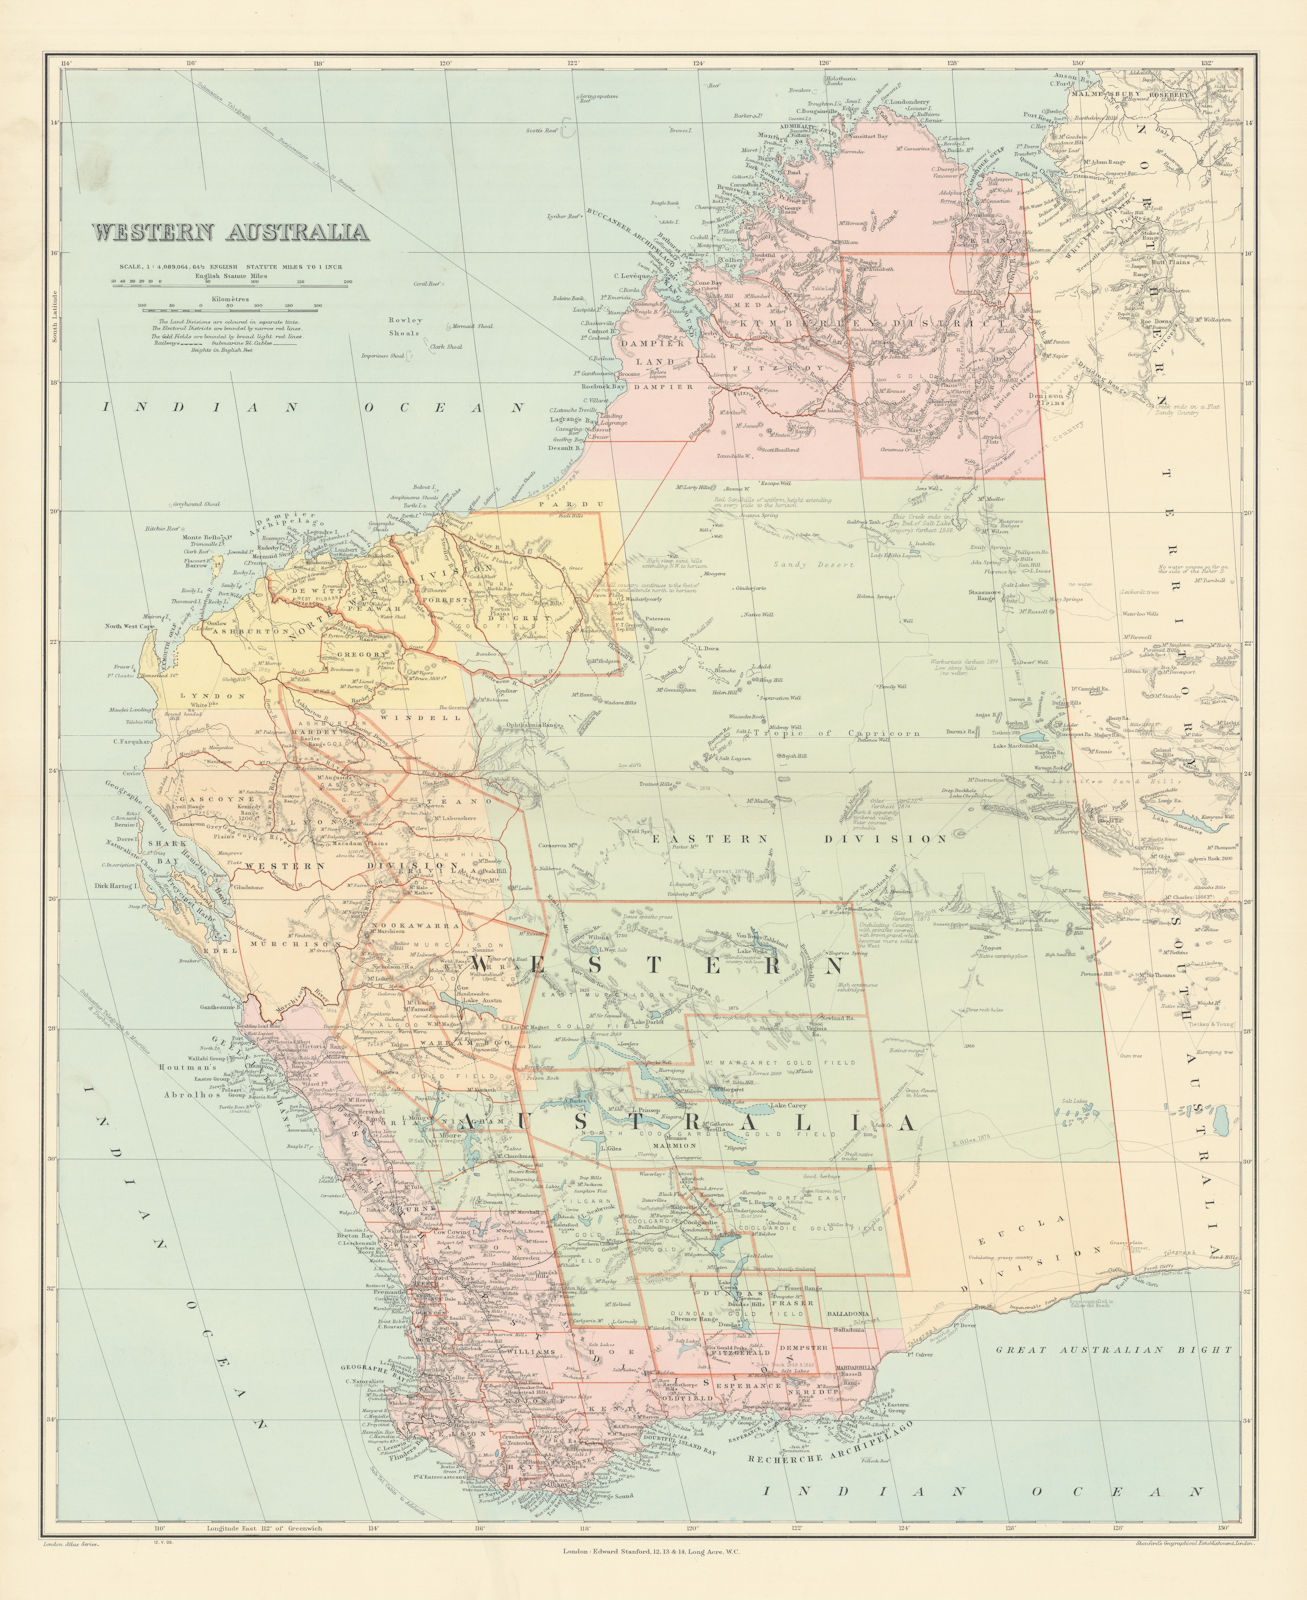 Western Australia. Districts. Explorers' routes. Large 66x55cm STANFORD 1904 map